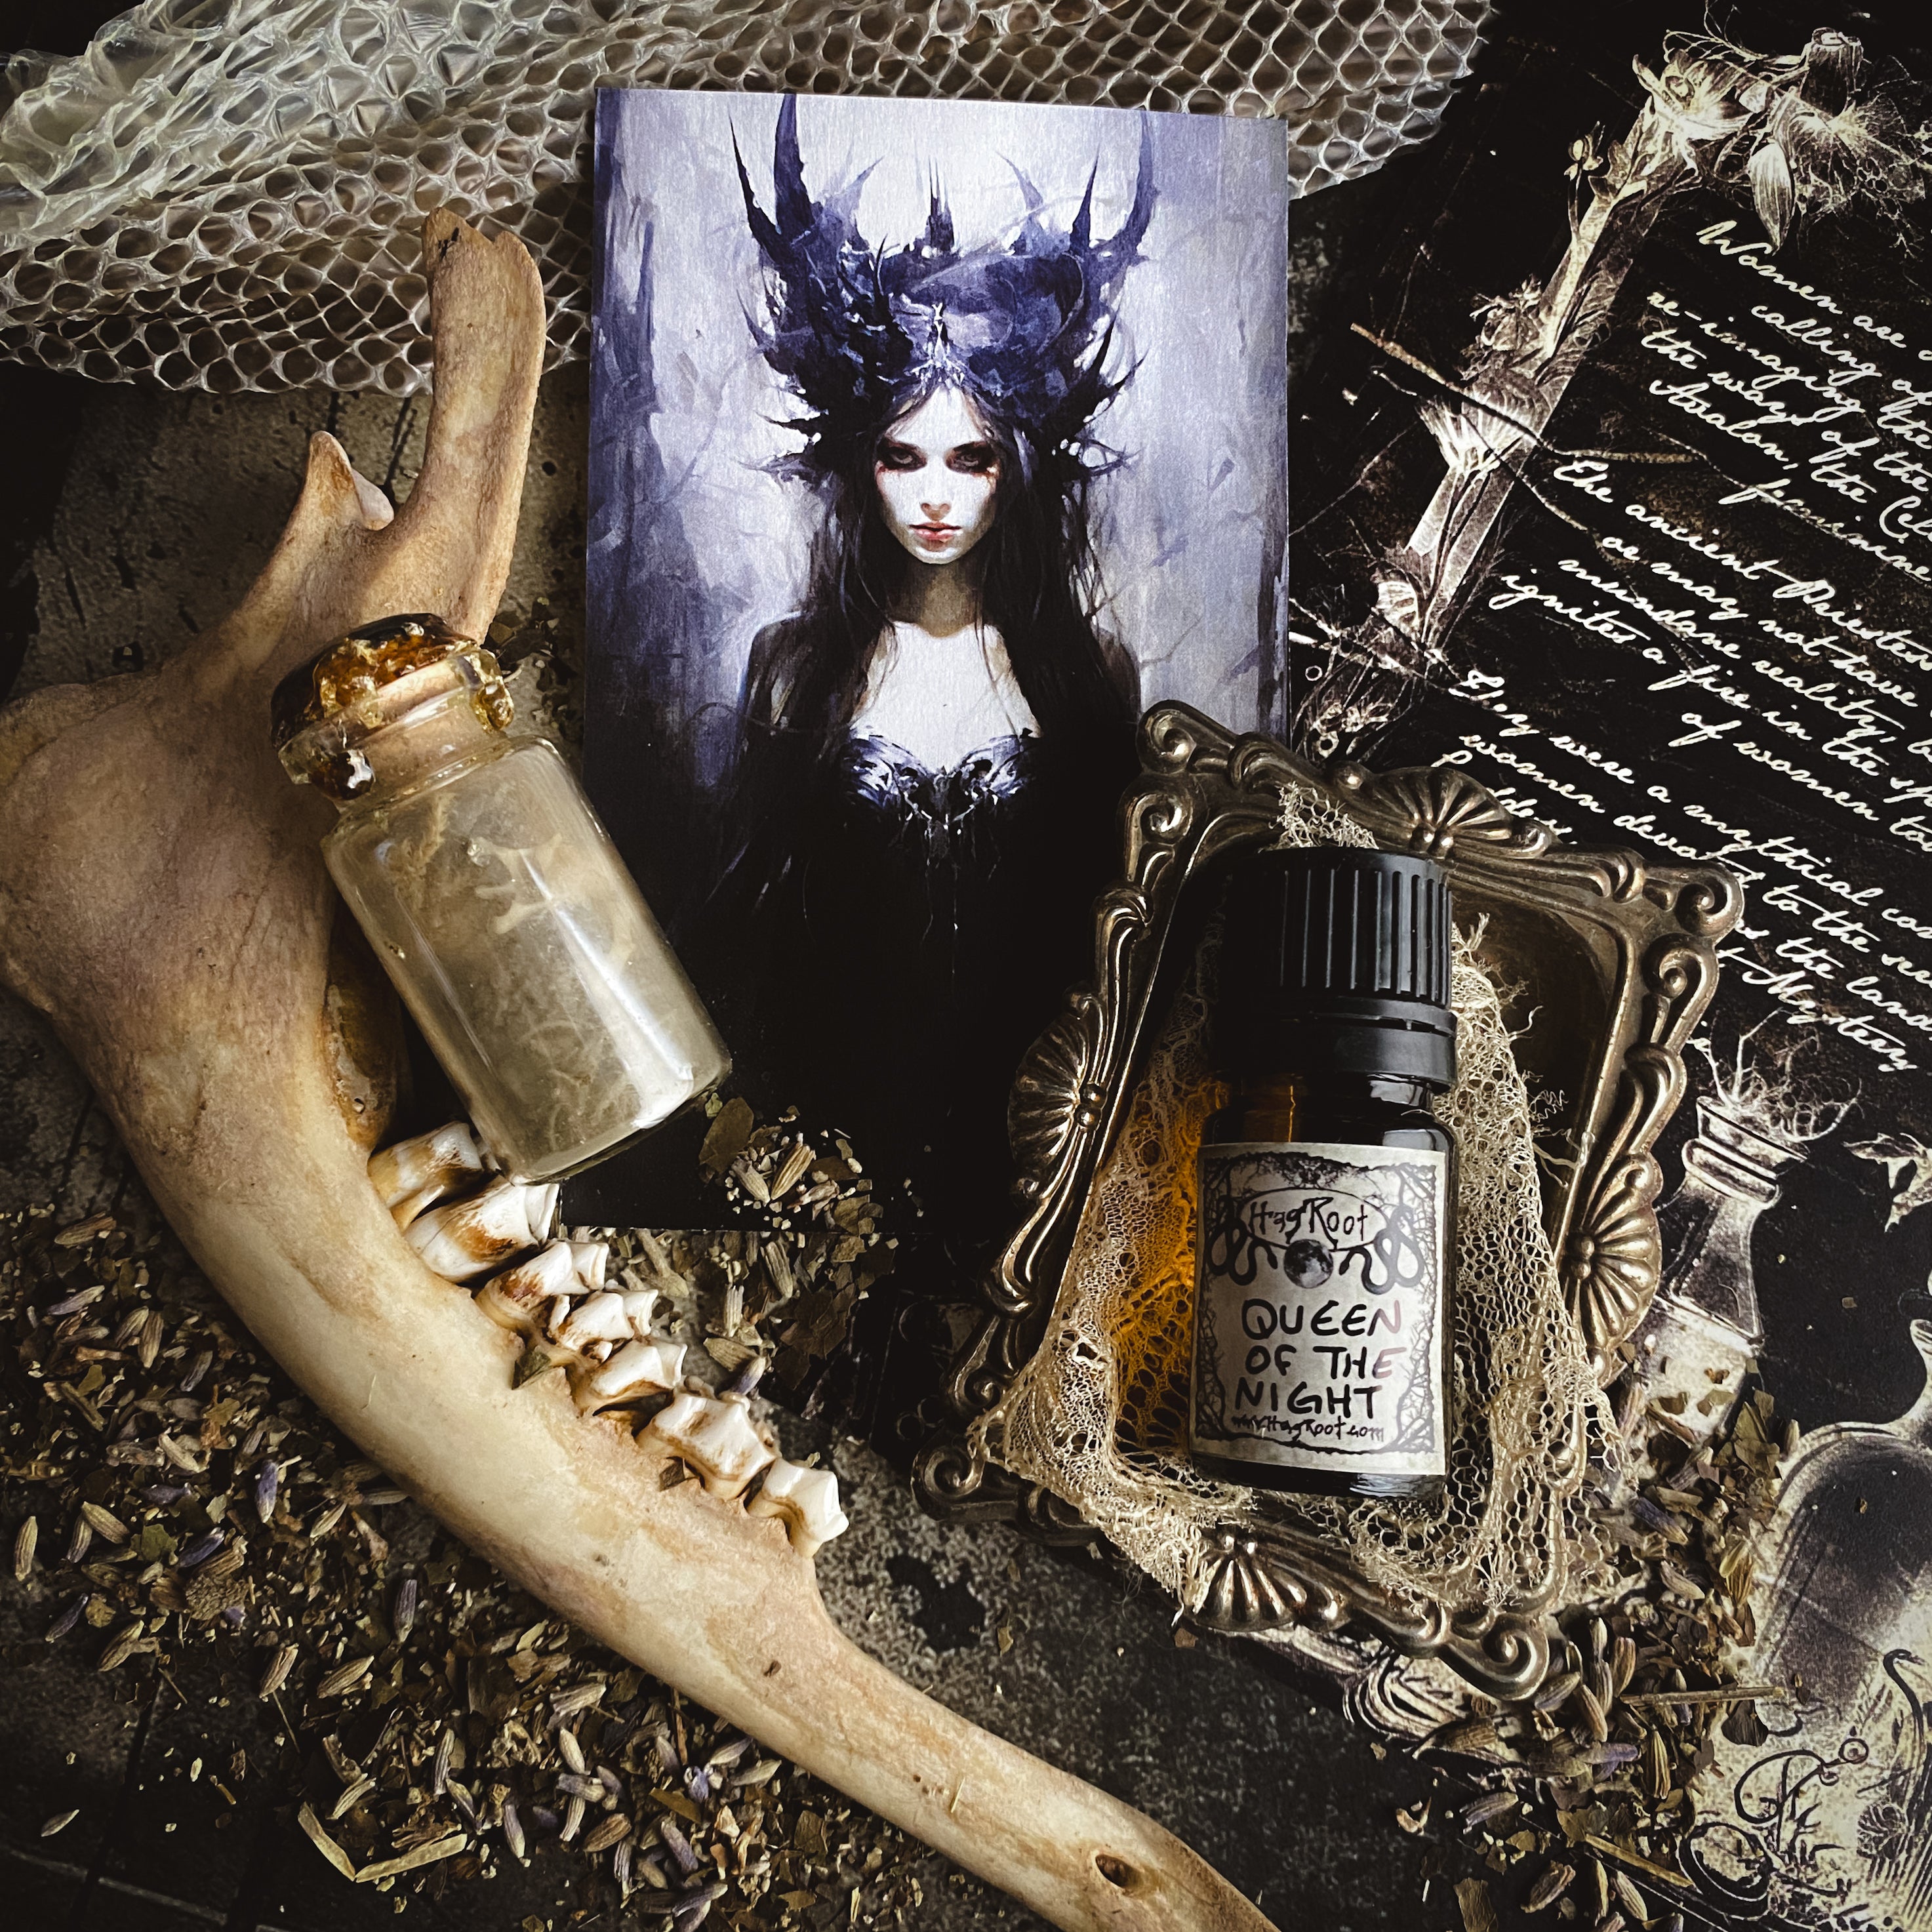 QUEEN OF THE NIGHT-(Dark Chocolate, Blood Orange, Frankincense Tears, Dark Spices, Forest)-Perfume, Cologne, Anointing, Ritual Oil